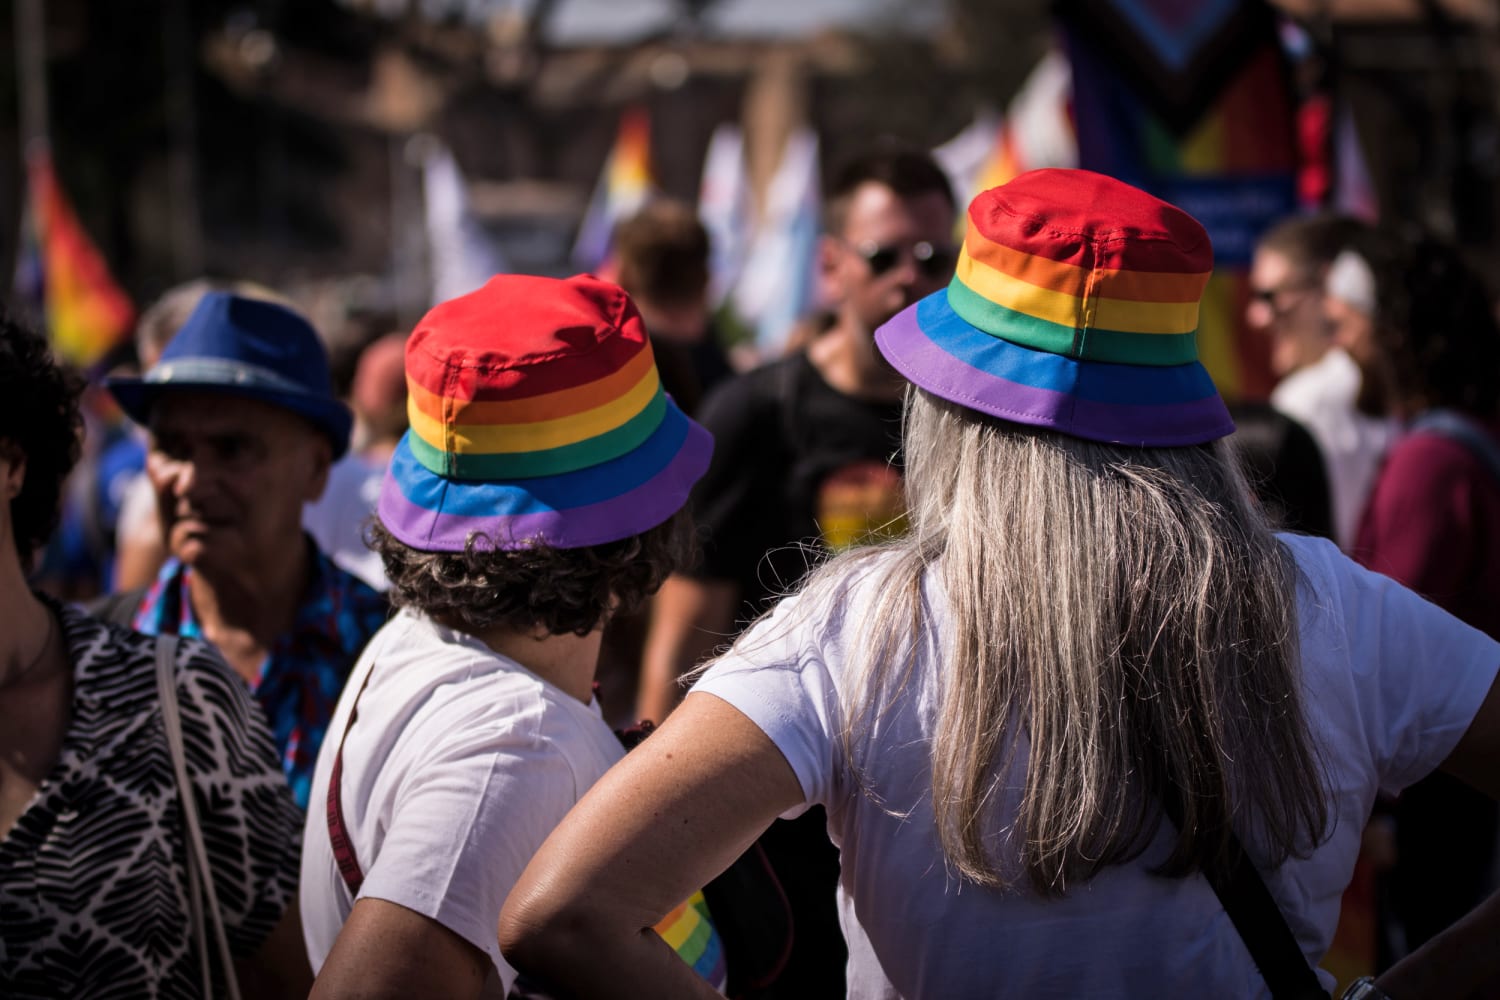 Italian prosecutor demands cancellation of birth certificates for lesbian couples